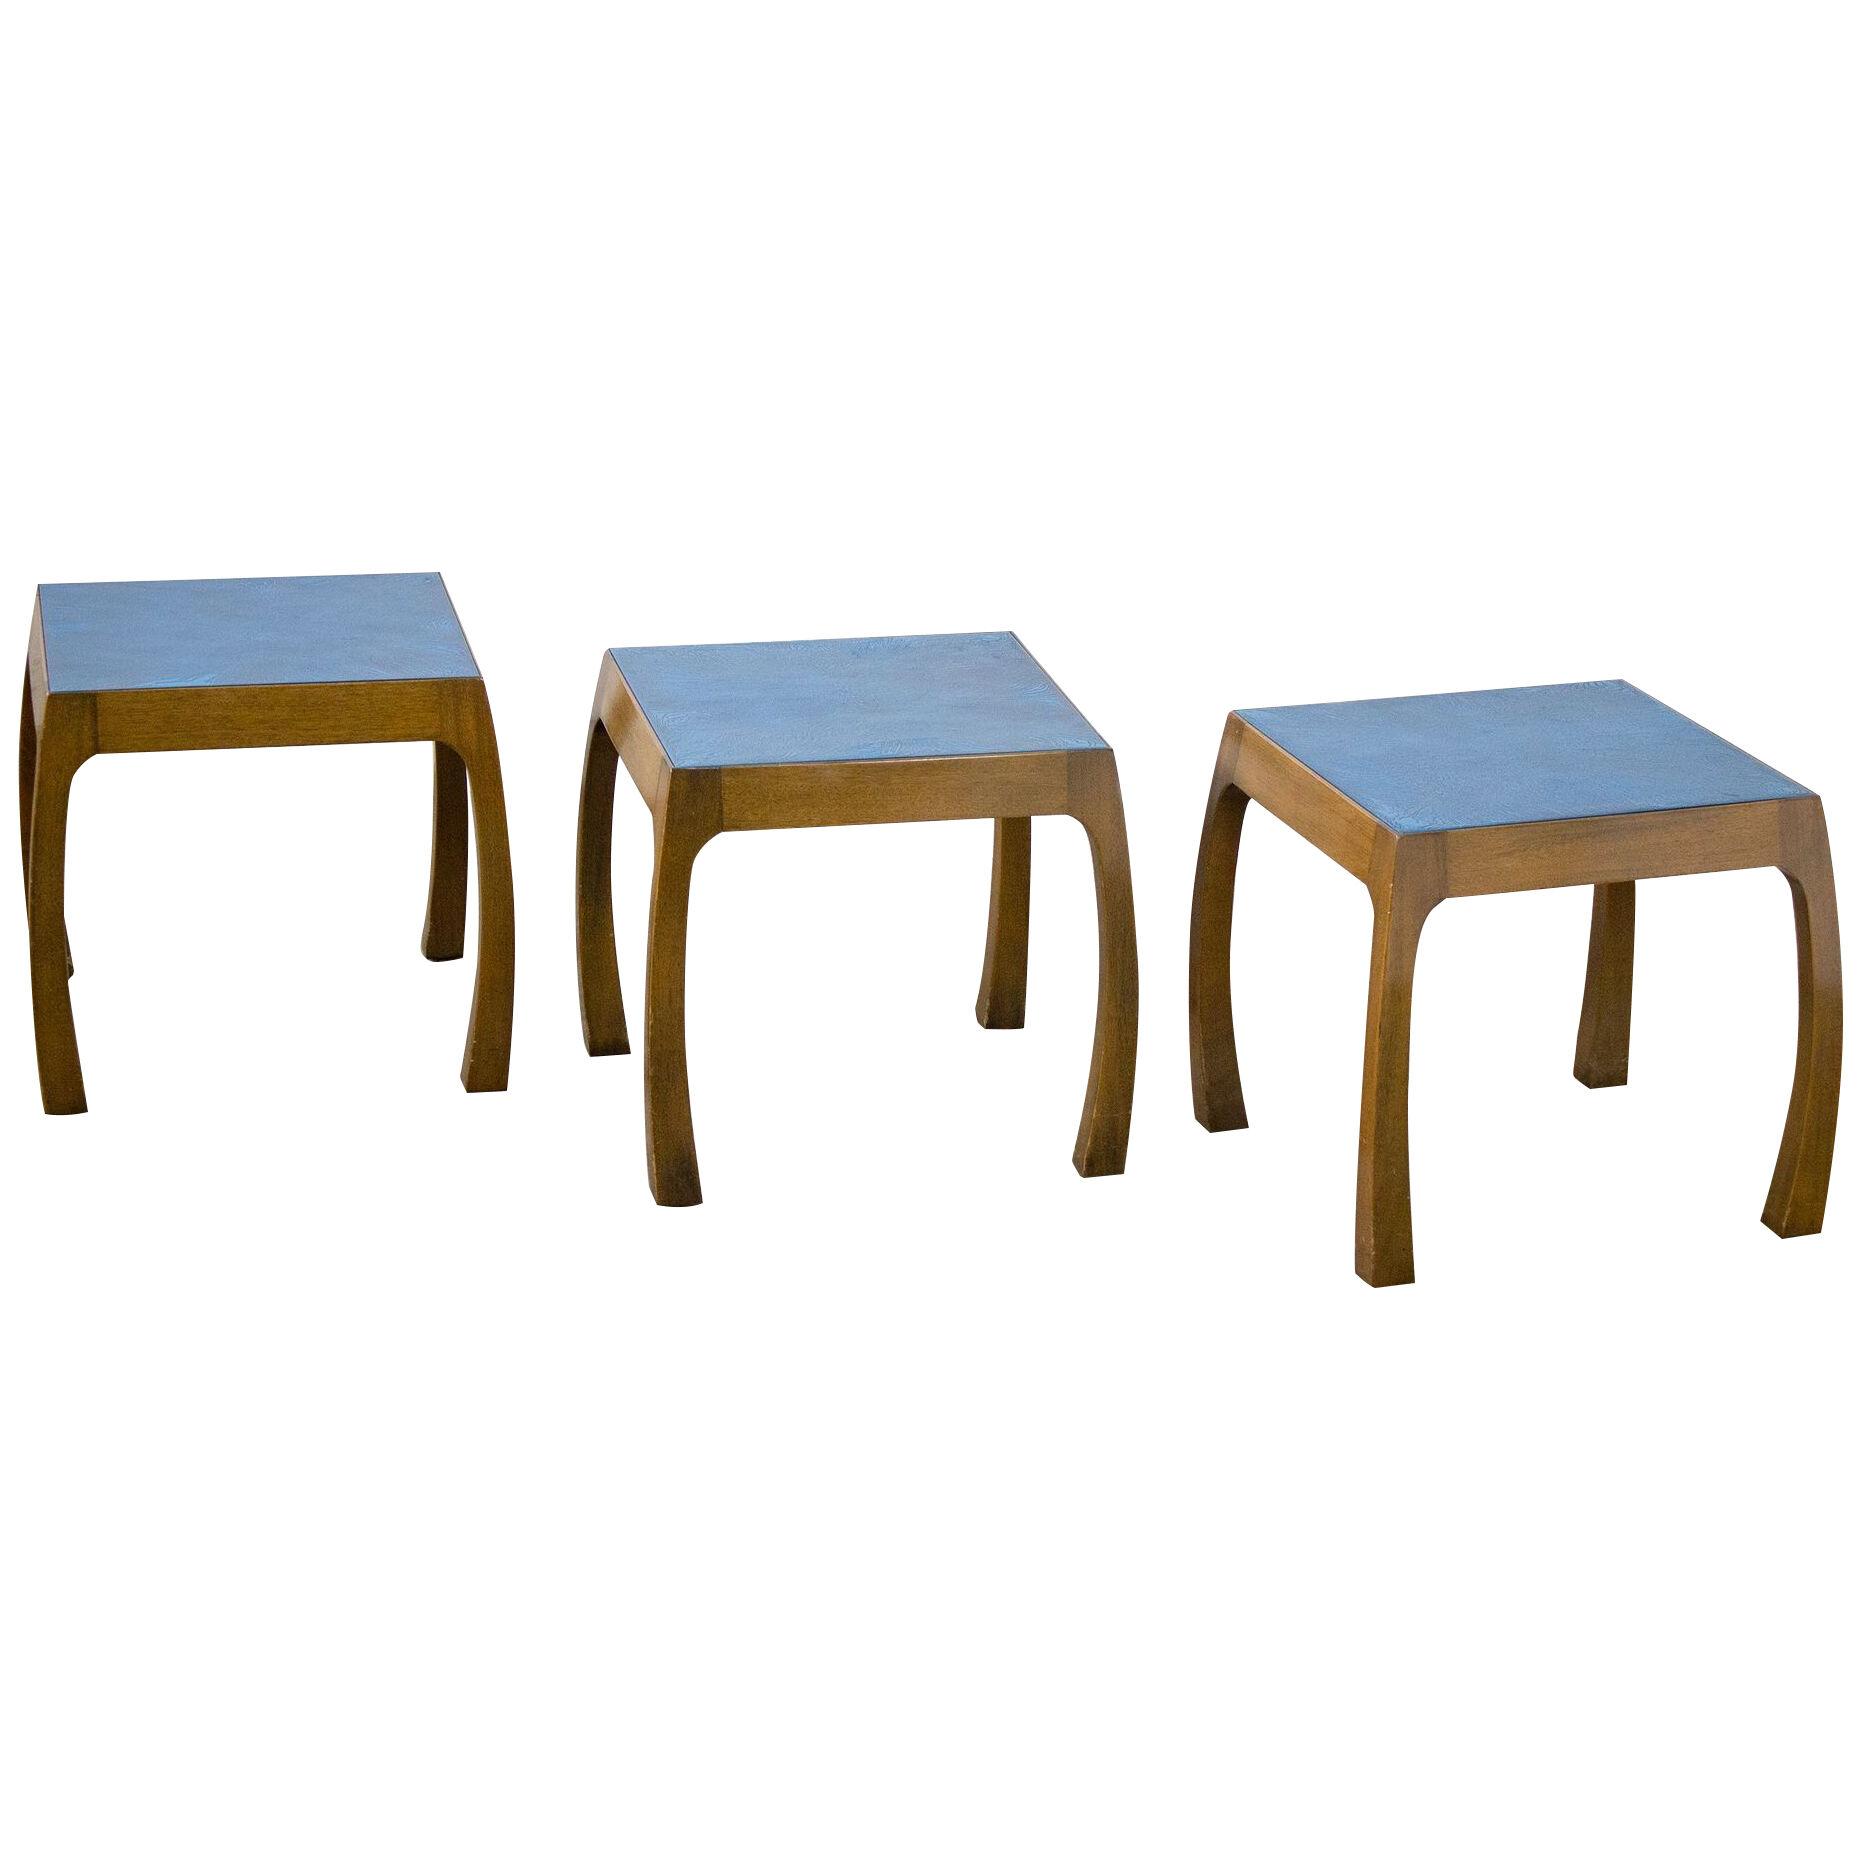 Harvey Probber Side Tables in Blue Enameled Copper and Mahogany 1960s